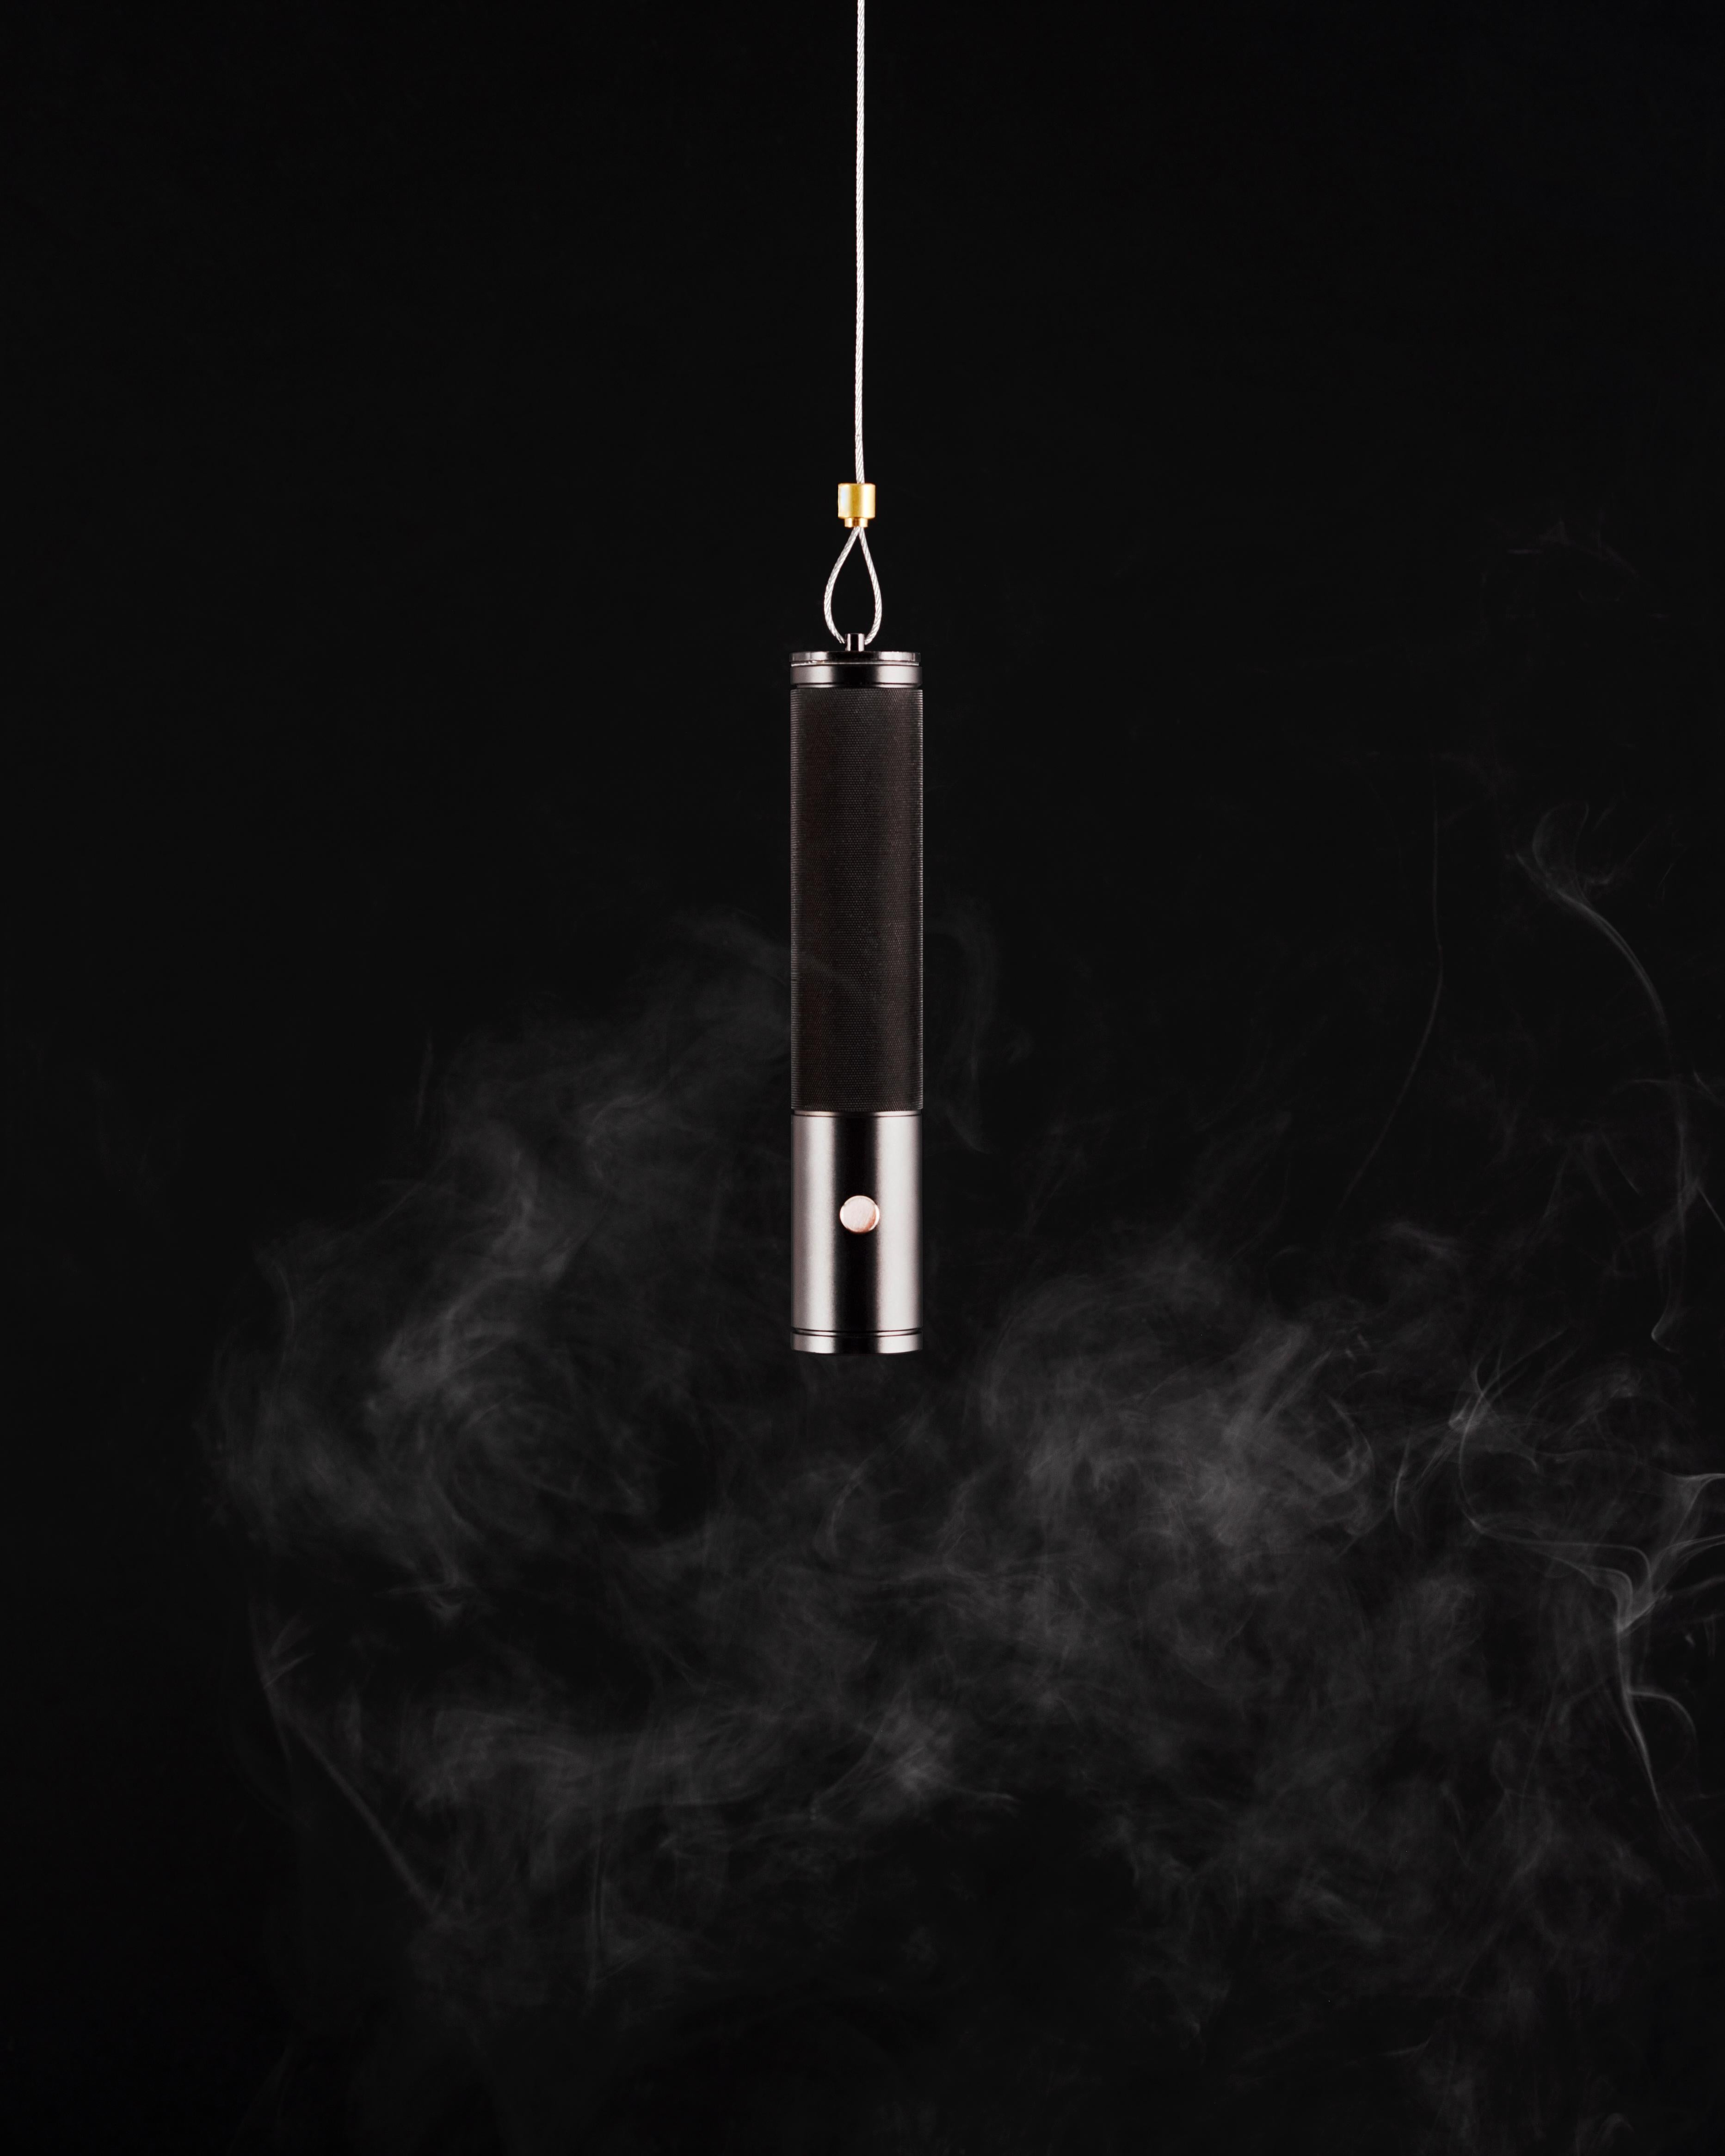 Halo Mag Pendant Lamp by Mandalaki
Dimensions: D 2.8 x H 14.5 cm
Materials: Aluminium, brass, iron

Weight: 200g
Input: 5V
Lumen: ~ 30lm - 100lm - 250lm - 500lm
Light Quality: 2700 Kelvin, 90 CRI
Battery capacity: 5000mA
Duration: ~ 100Hours at